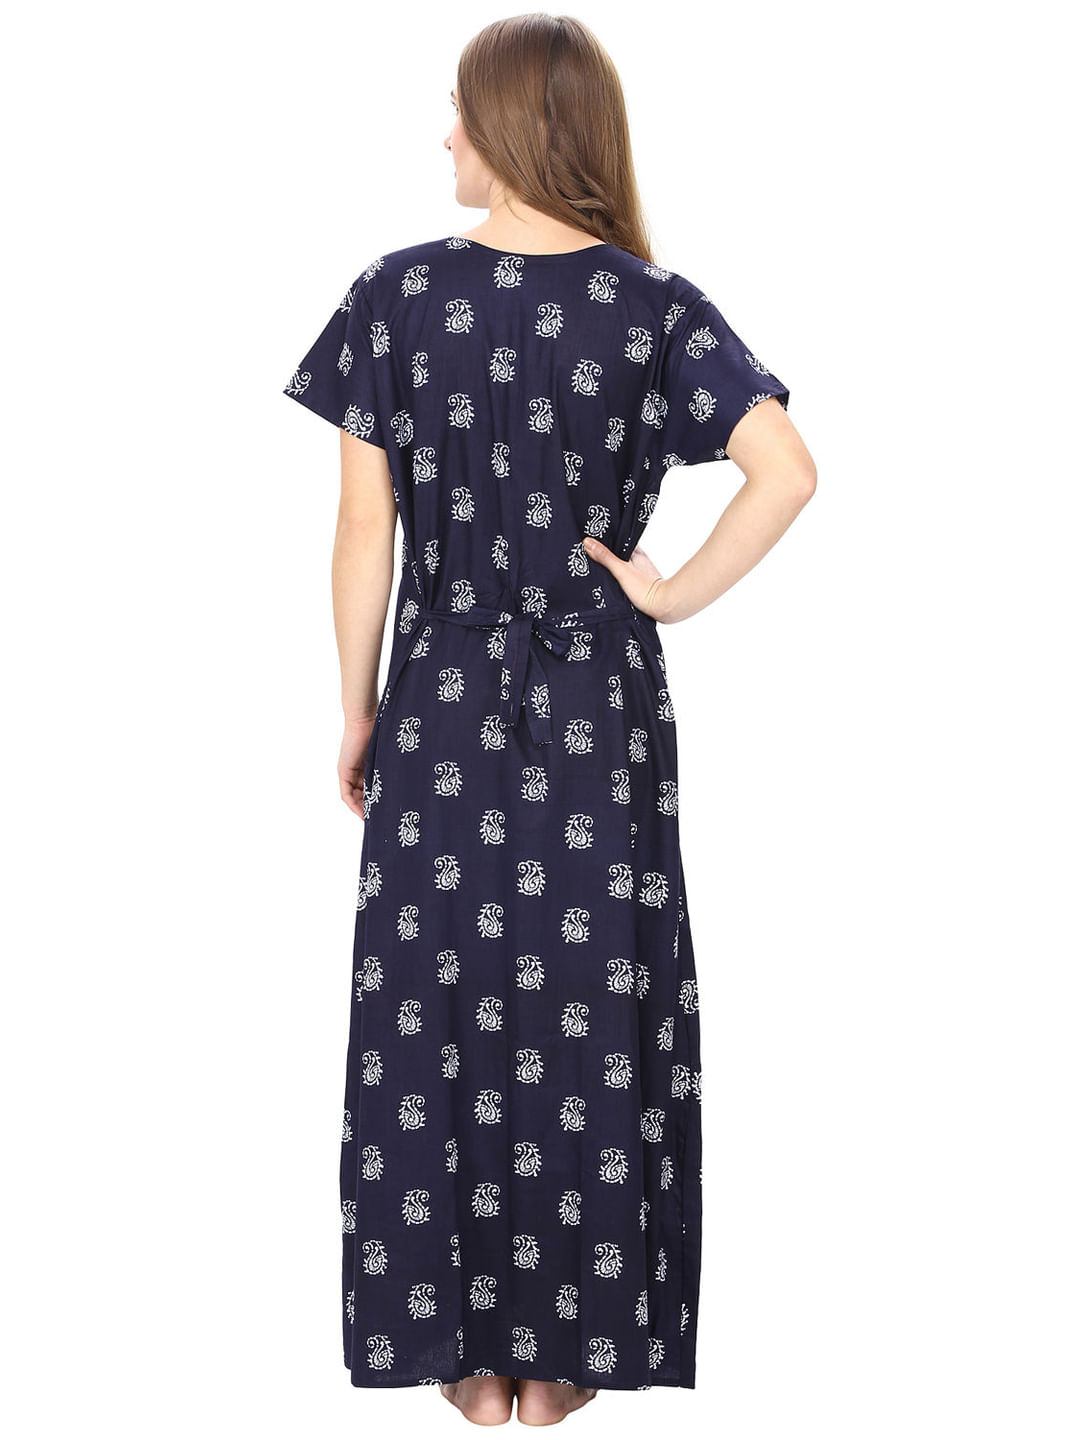 Cotton Navy Blue Printed Maternity Nighty (Free Size)